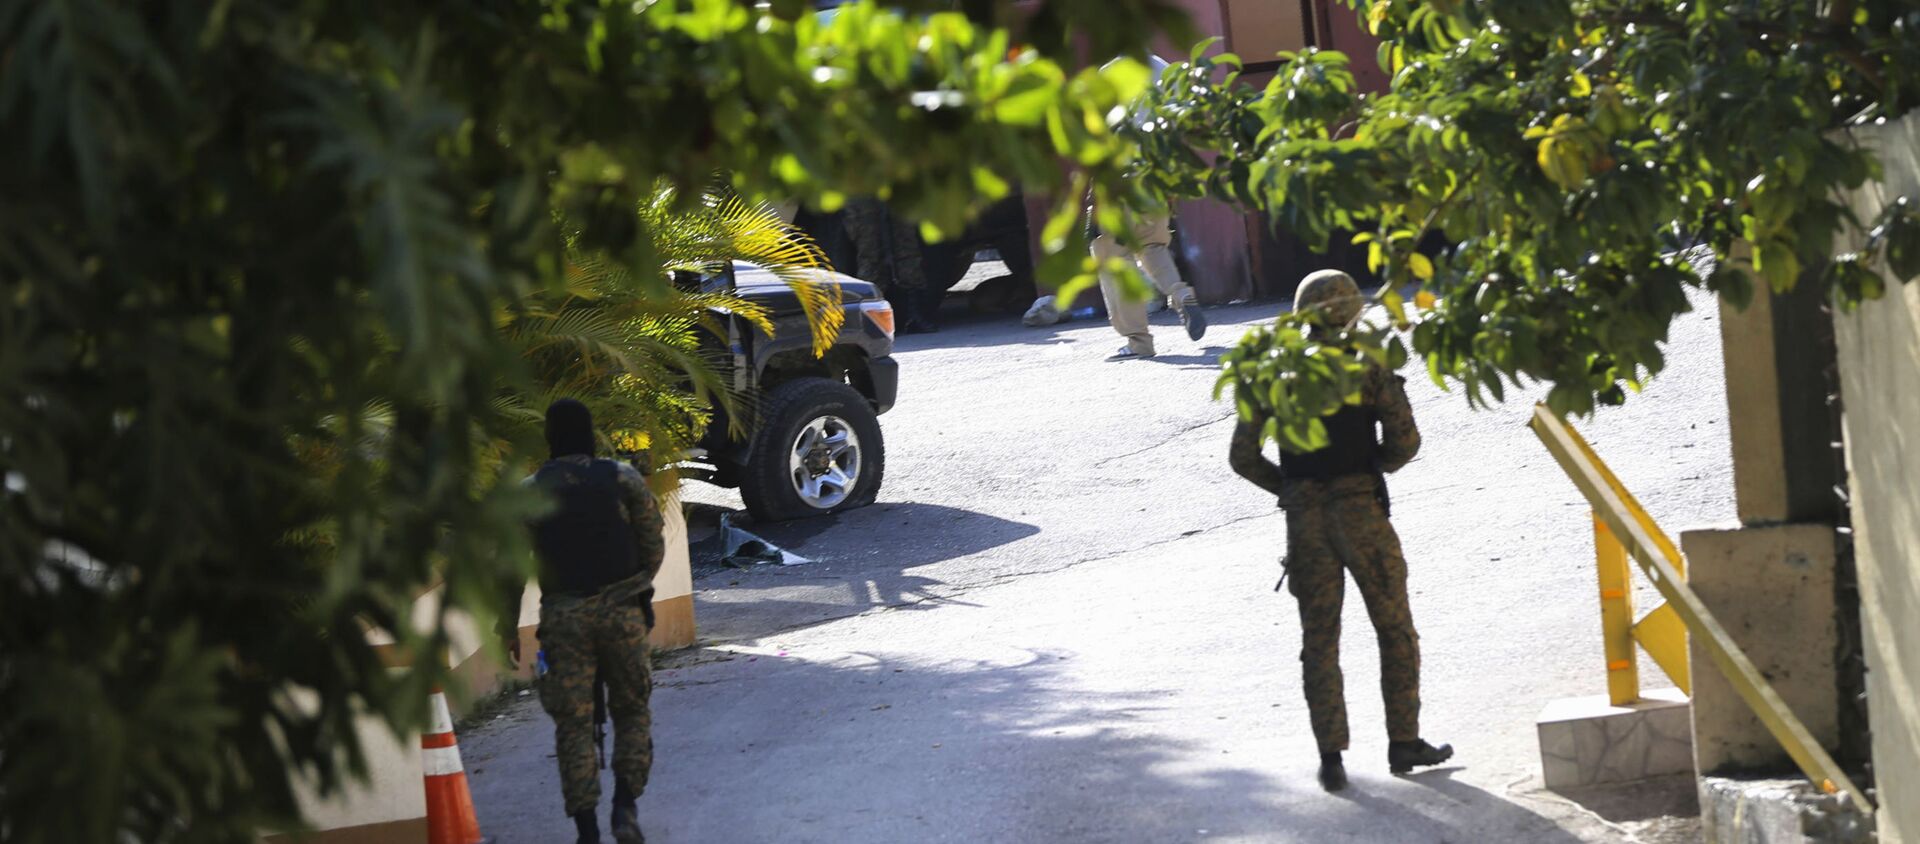 Soldiers stand guard at the entrance to the house of late Haitian President Jovenel Moise in Port-au-Prince, Haiti, Wednesday, July 7, 2021. Moïse was assassinated in an attack on his private residence early Wednesday, and first lady Martine Moïse was shot in the overnight attack and hospitalized, according to a statement from the country’s interim prime minister. (AP Photo/Joseph Odelyn) - 俄羅斯衛星通訊社, 1920, 14.07.2021